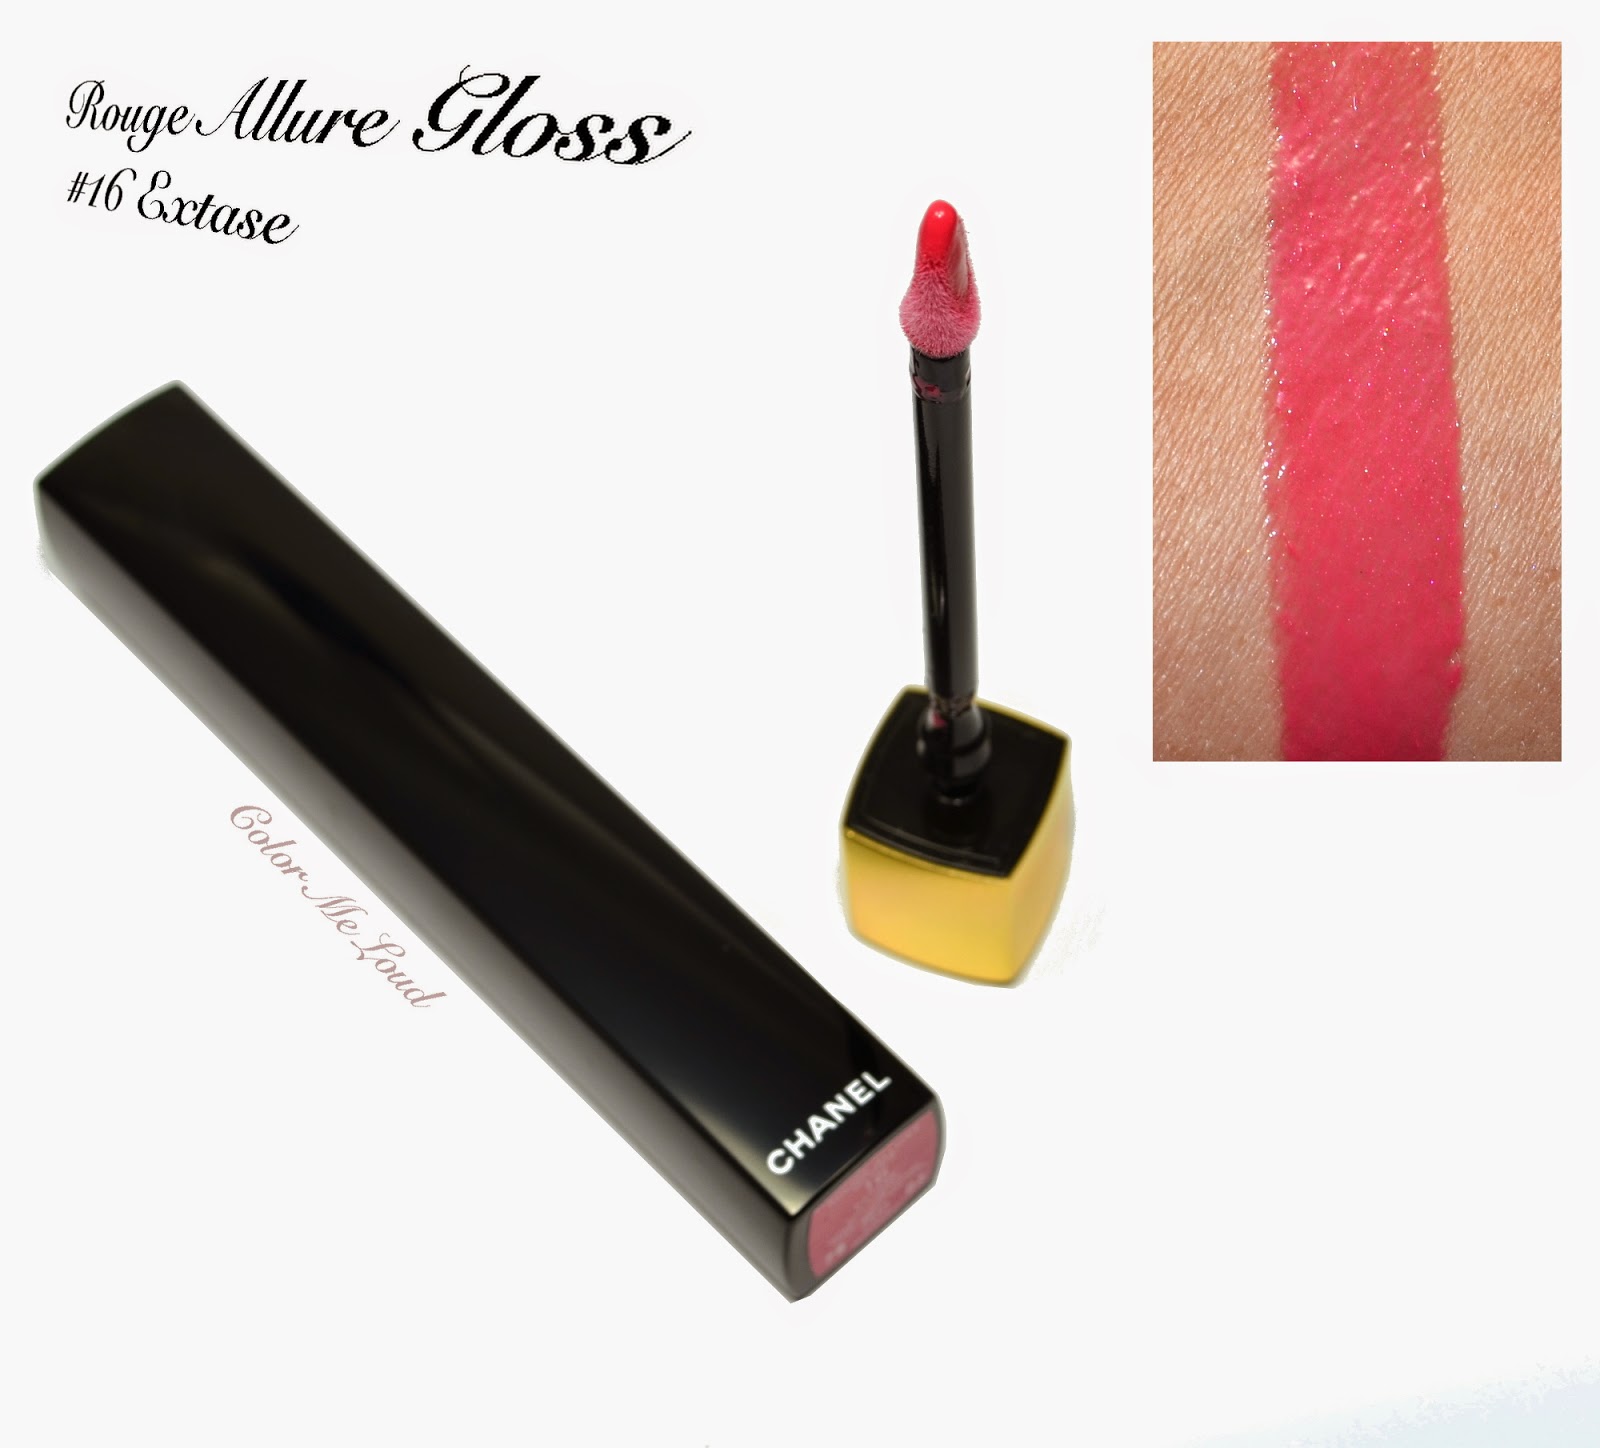 Chanel Rouge Allure Gloss One Click Collection Swatches, All